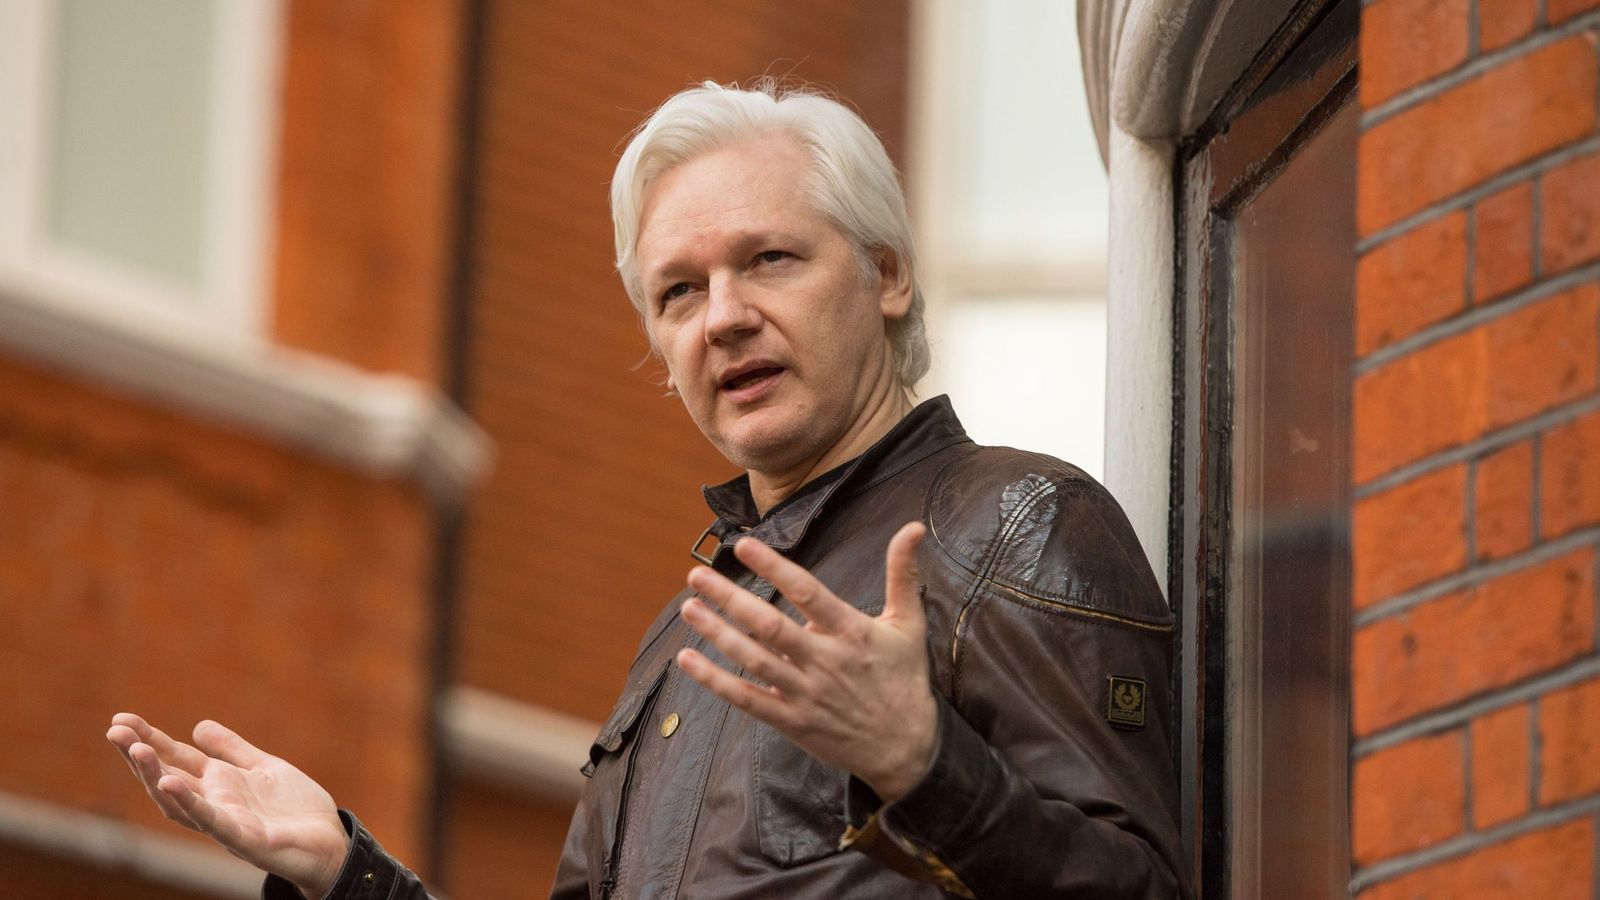 Judge tells Julian Assange to have 'courage' to face court 